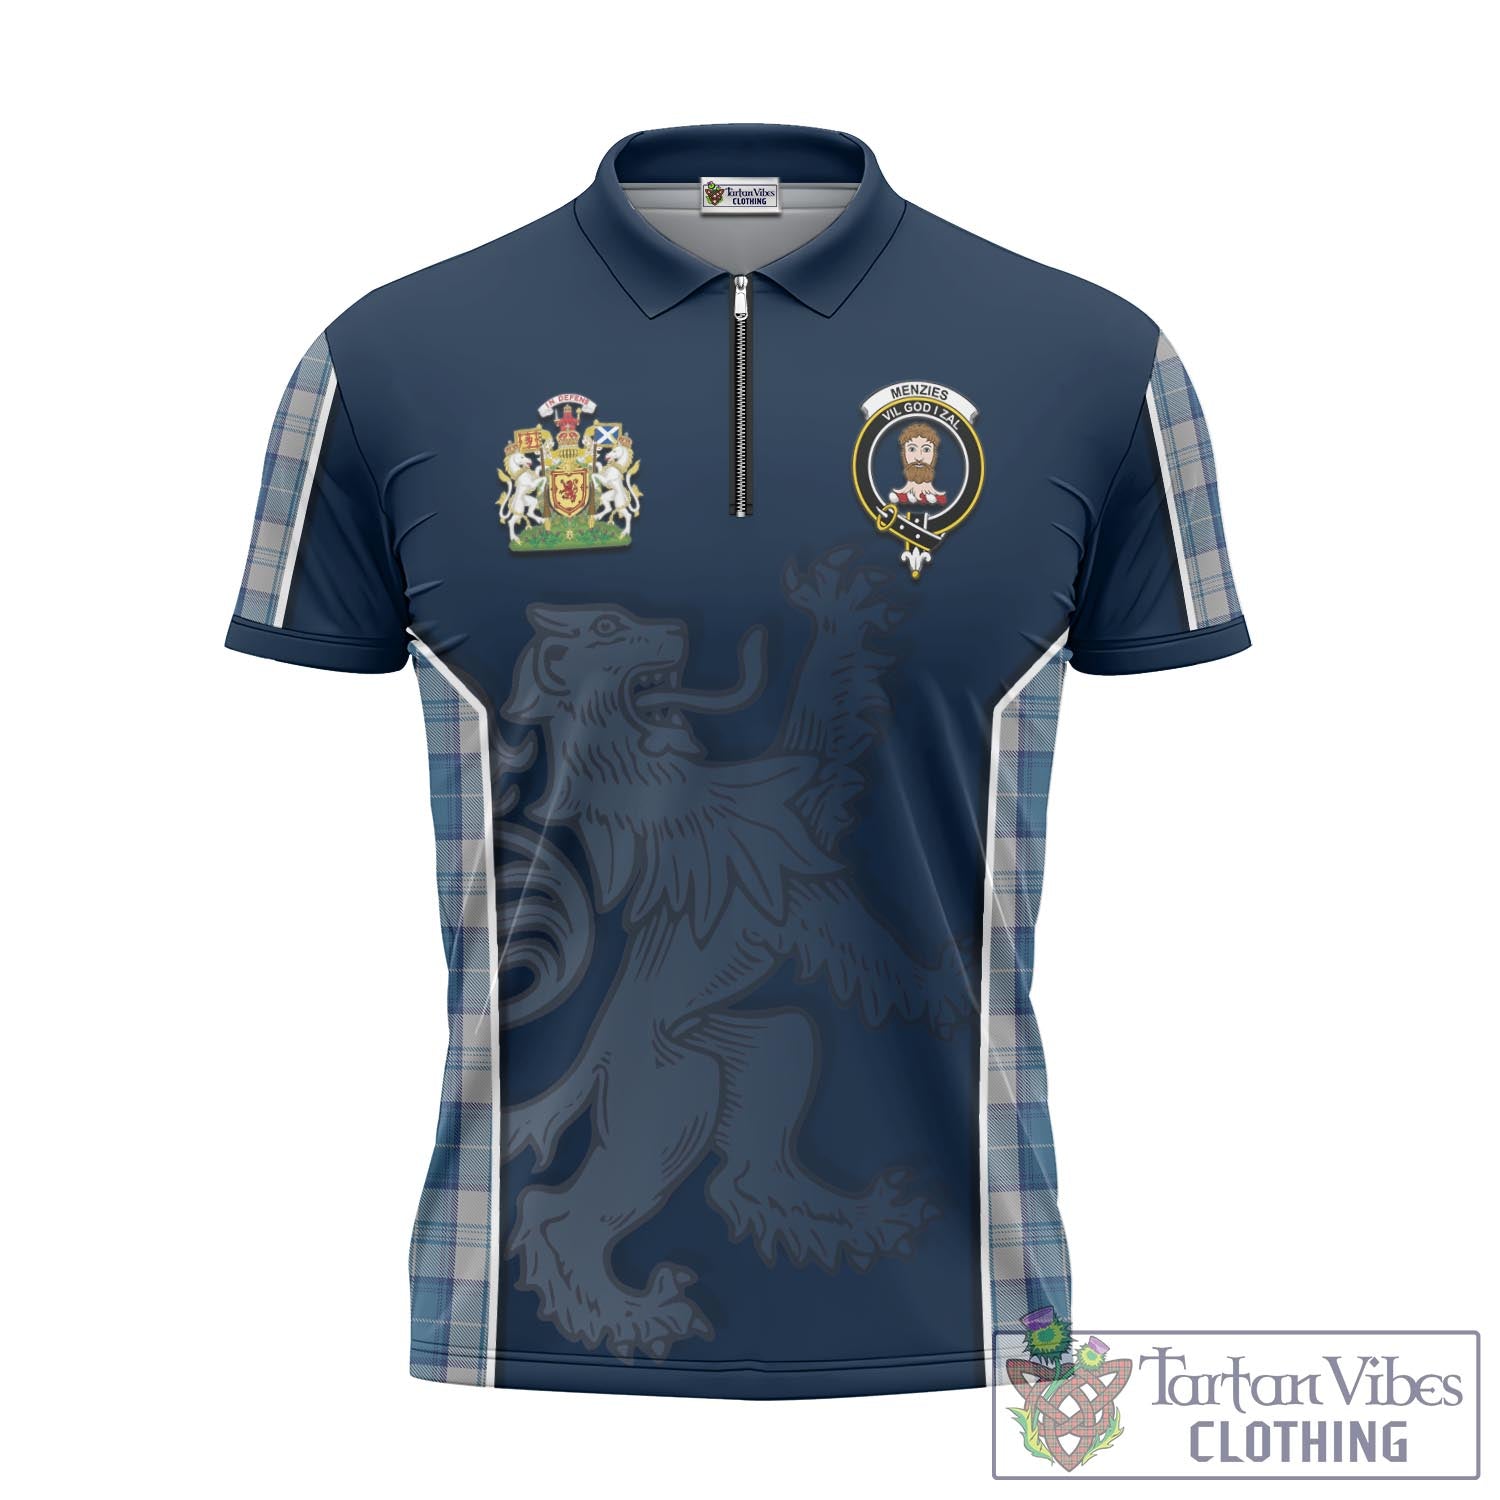 Tartan Vibes Clothing Menzies Dress Blue and White Tartan Zipper Polo Shirt with Family Crest and Lion Rampant Vibes Sport Style